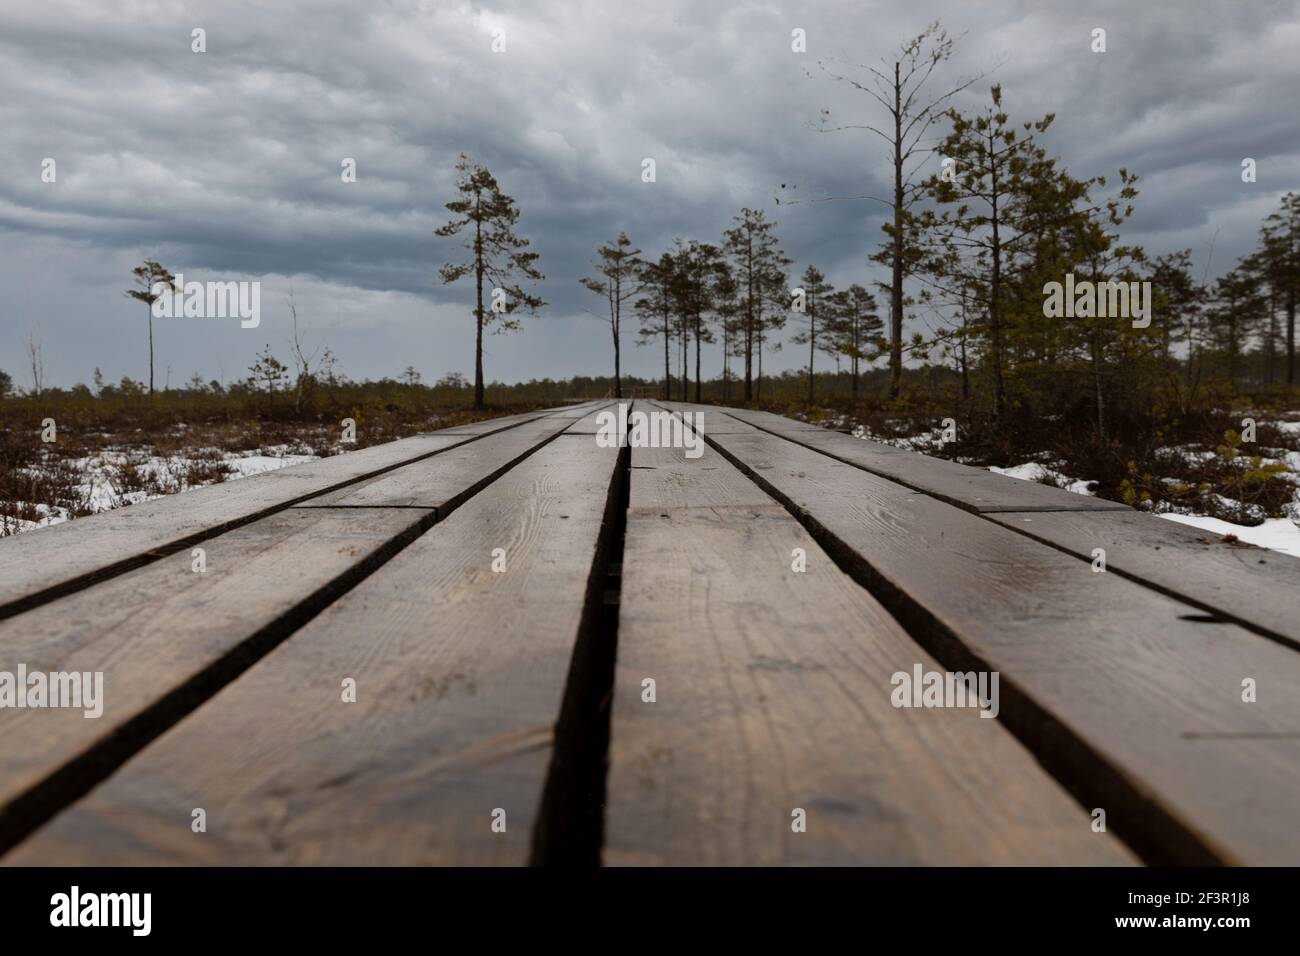 Close up of wooden pathway in a swamp with small trees and dramatic sky. Stock Photo